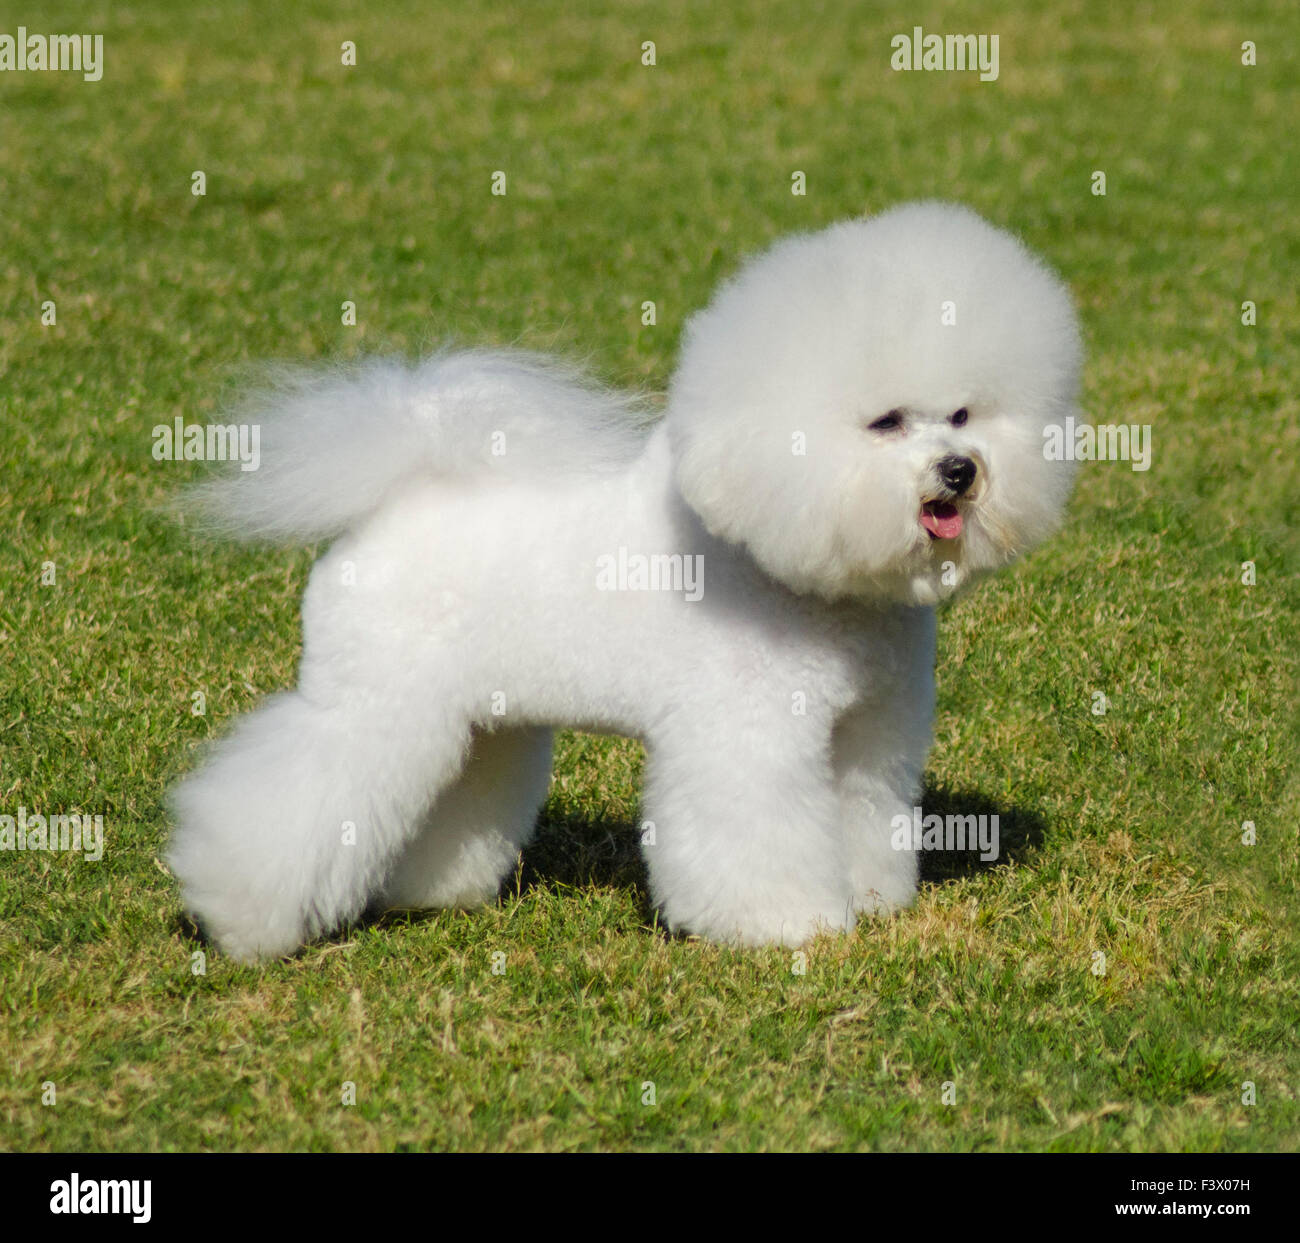 Bichon Frise (curly lap dog) puppy. A small breed of dog of the Bichon  type. The Bichon Frise is a member of the Non-Sporting Group of dog breeds  in t Stock Photo -